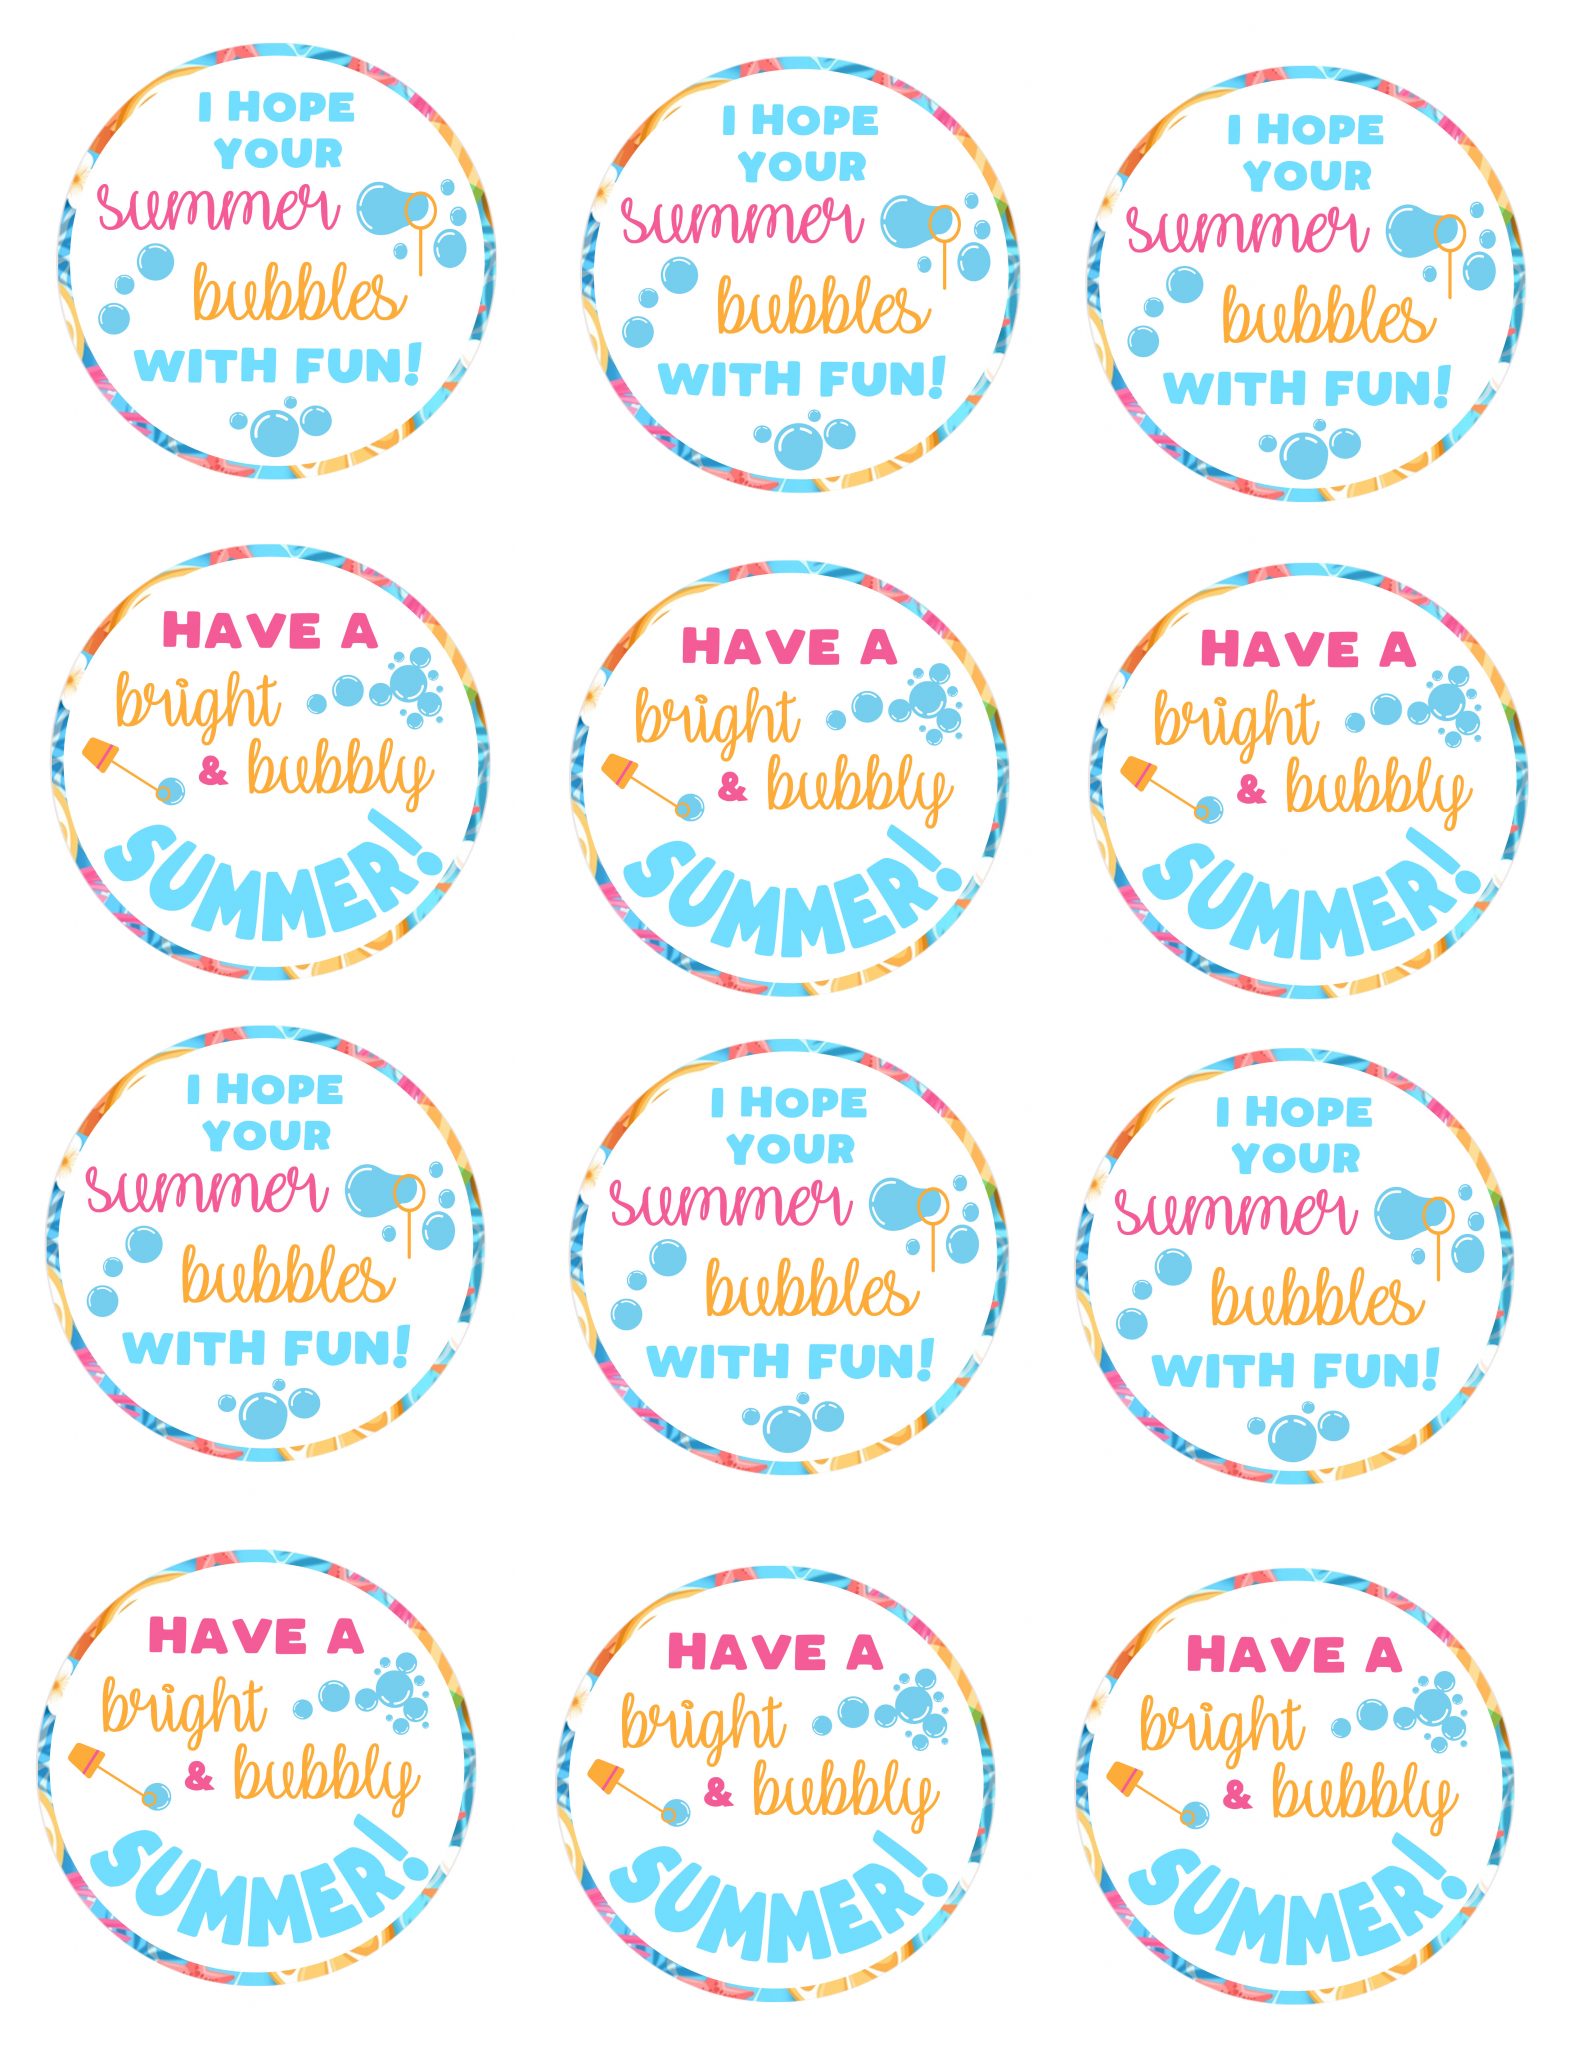 end-of-school-year-summertime-bubble-gift-idea-for-kids-free